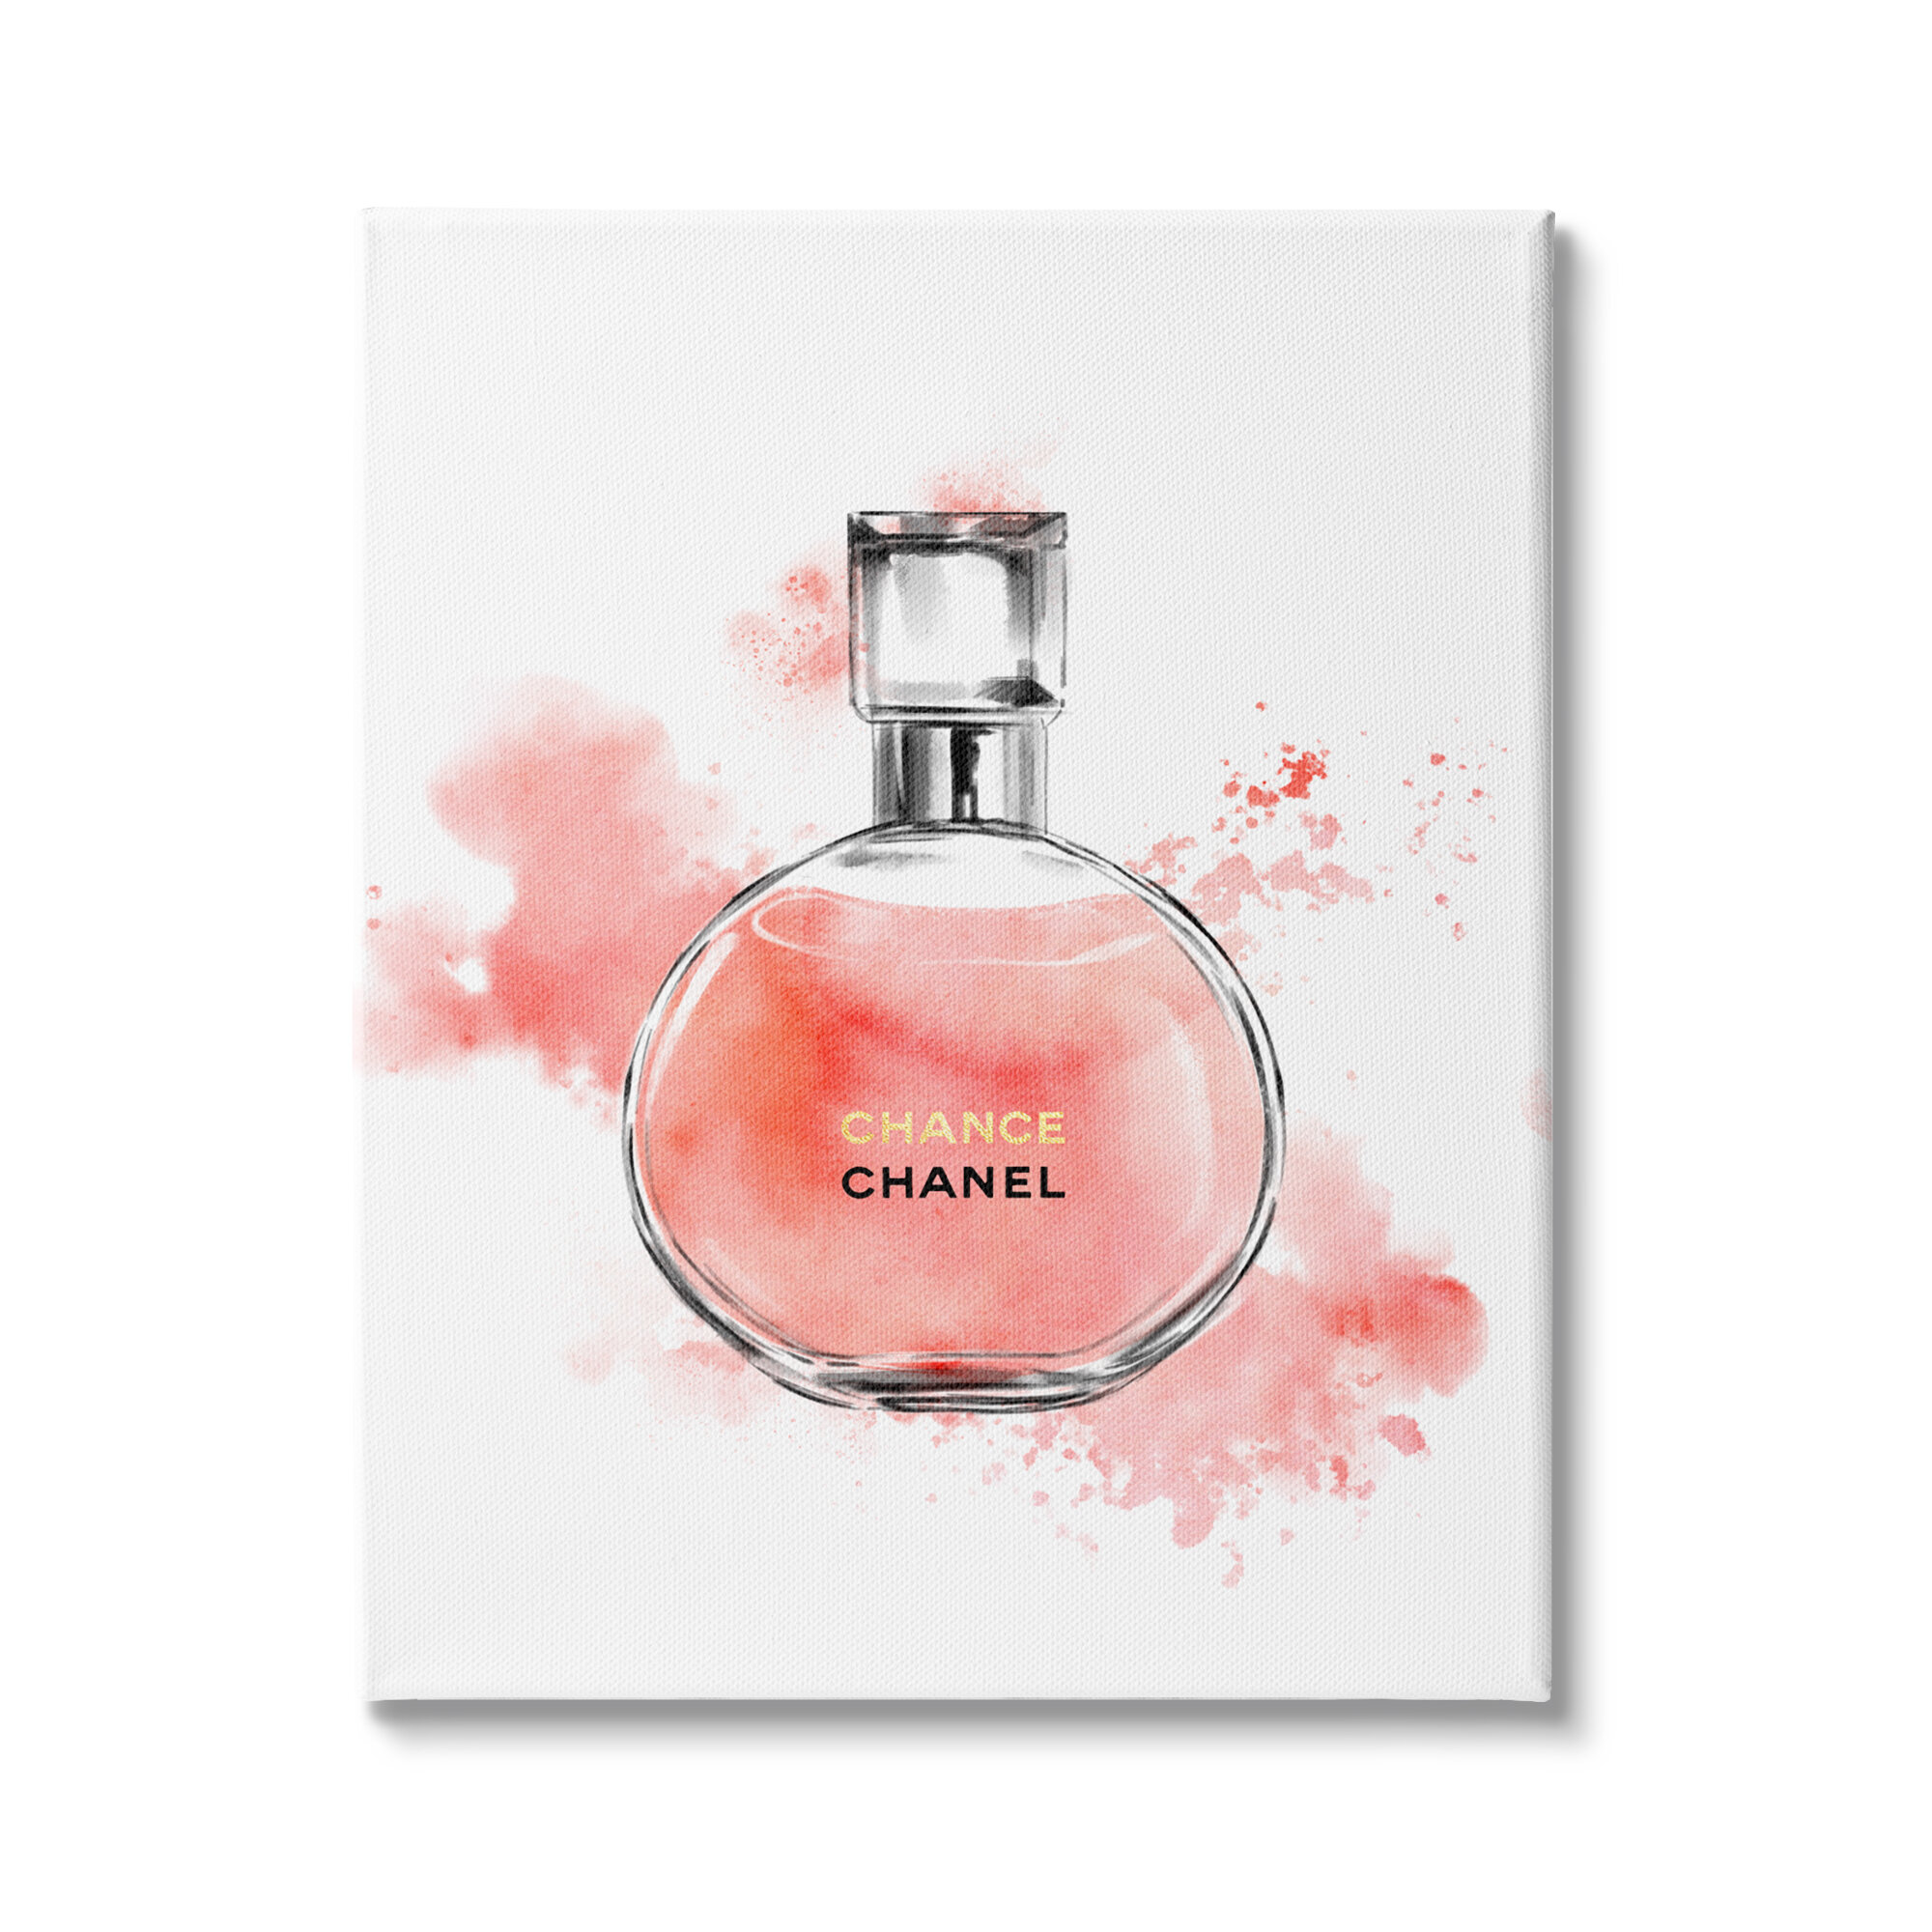 Stupell Industries Pink Fashion Watercolor Cosmetic Perfume Bottle Designer  Glam On Canvas by Ziwei Li Print